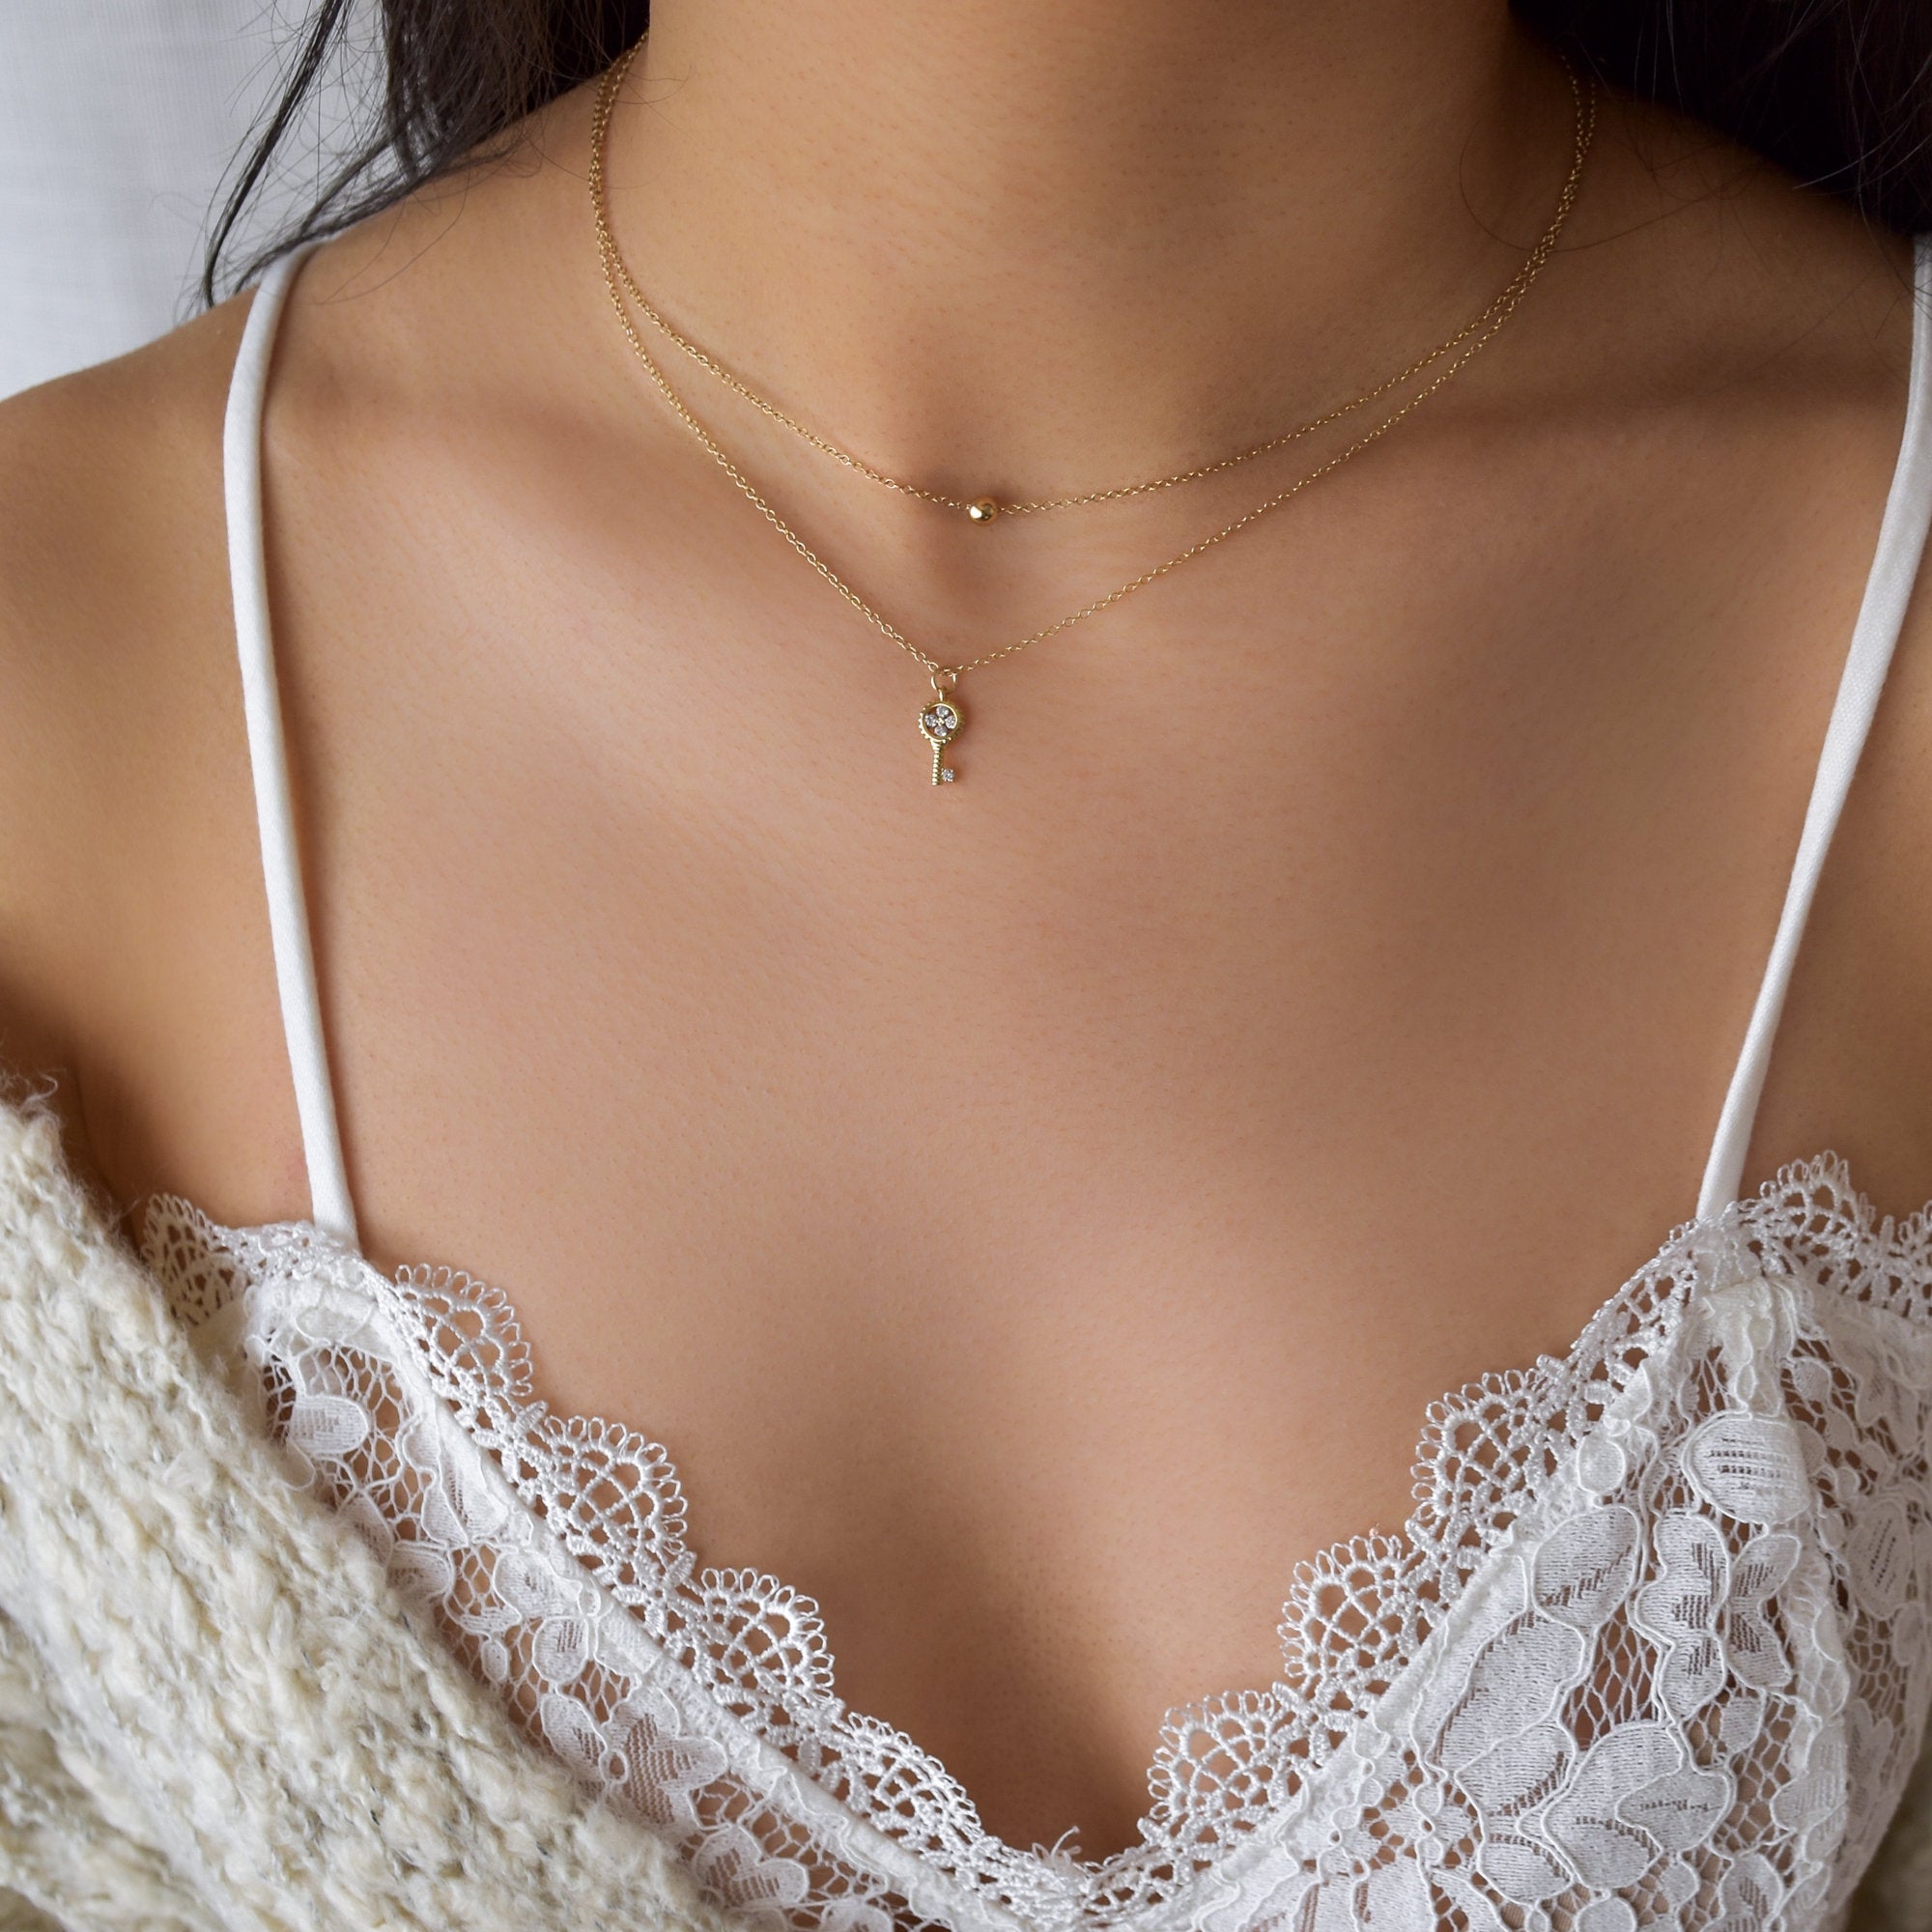 Dainty Gold Bead Necklace